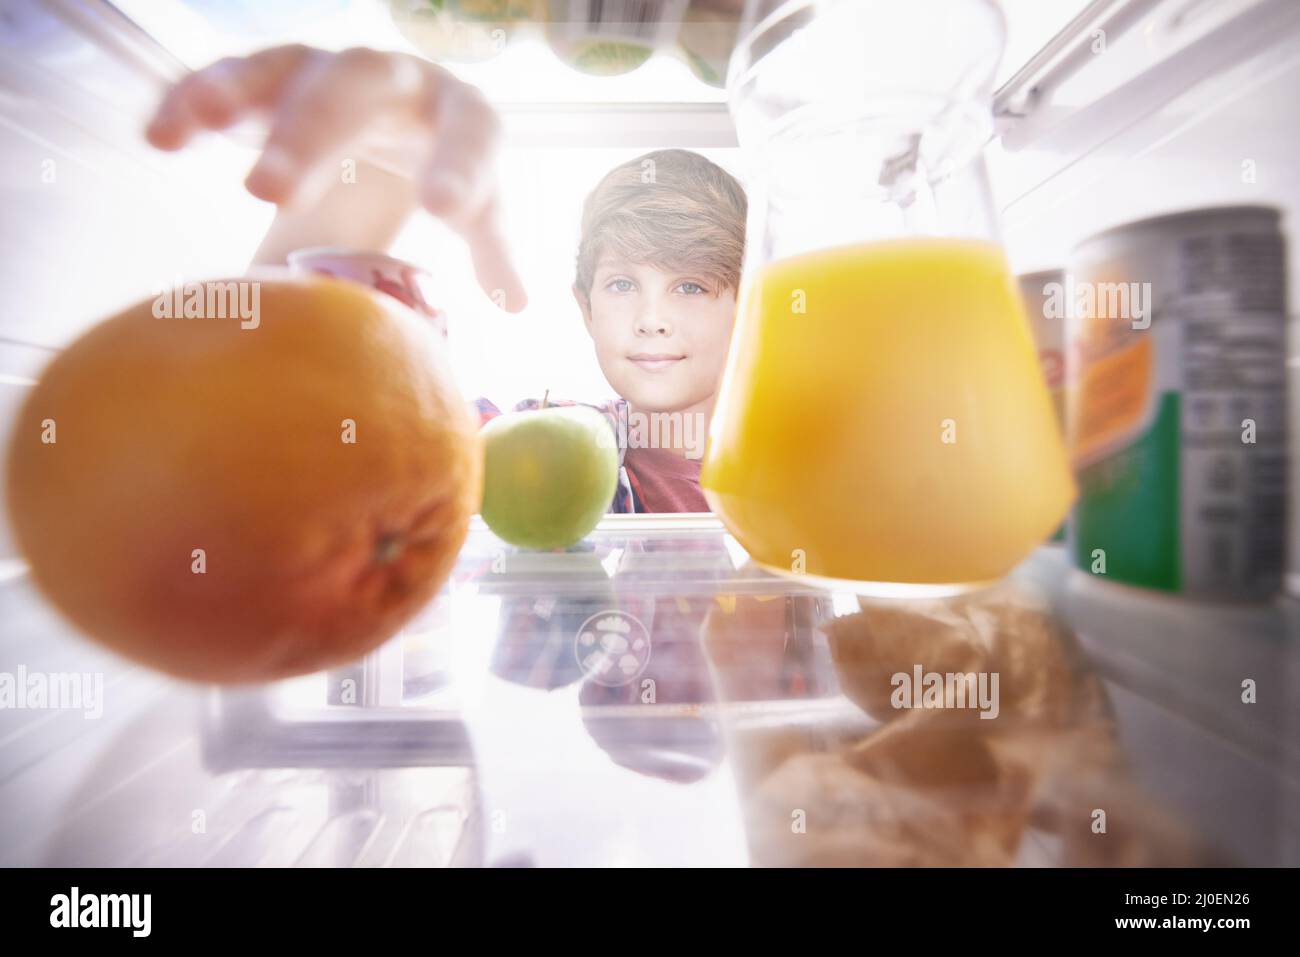 Making the right choice.... Shot of a young boy reaching into the fridge for a snack. Stock Photo